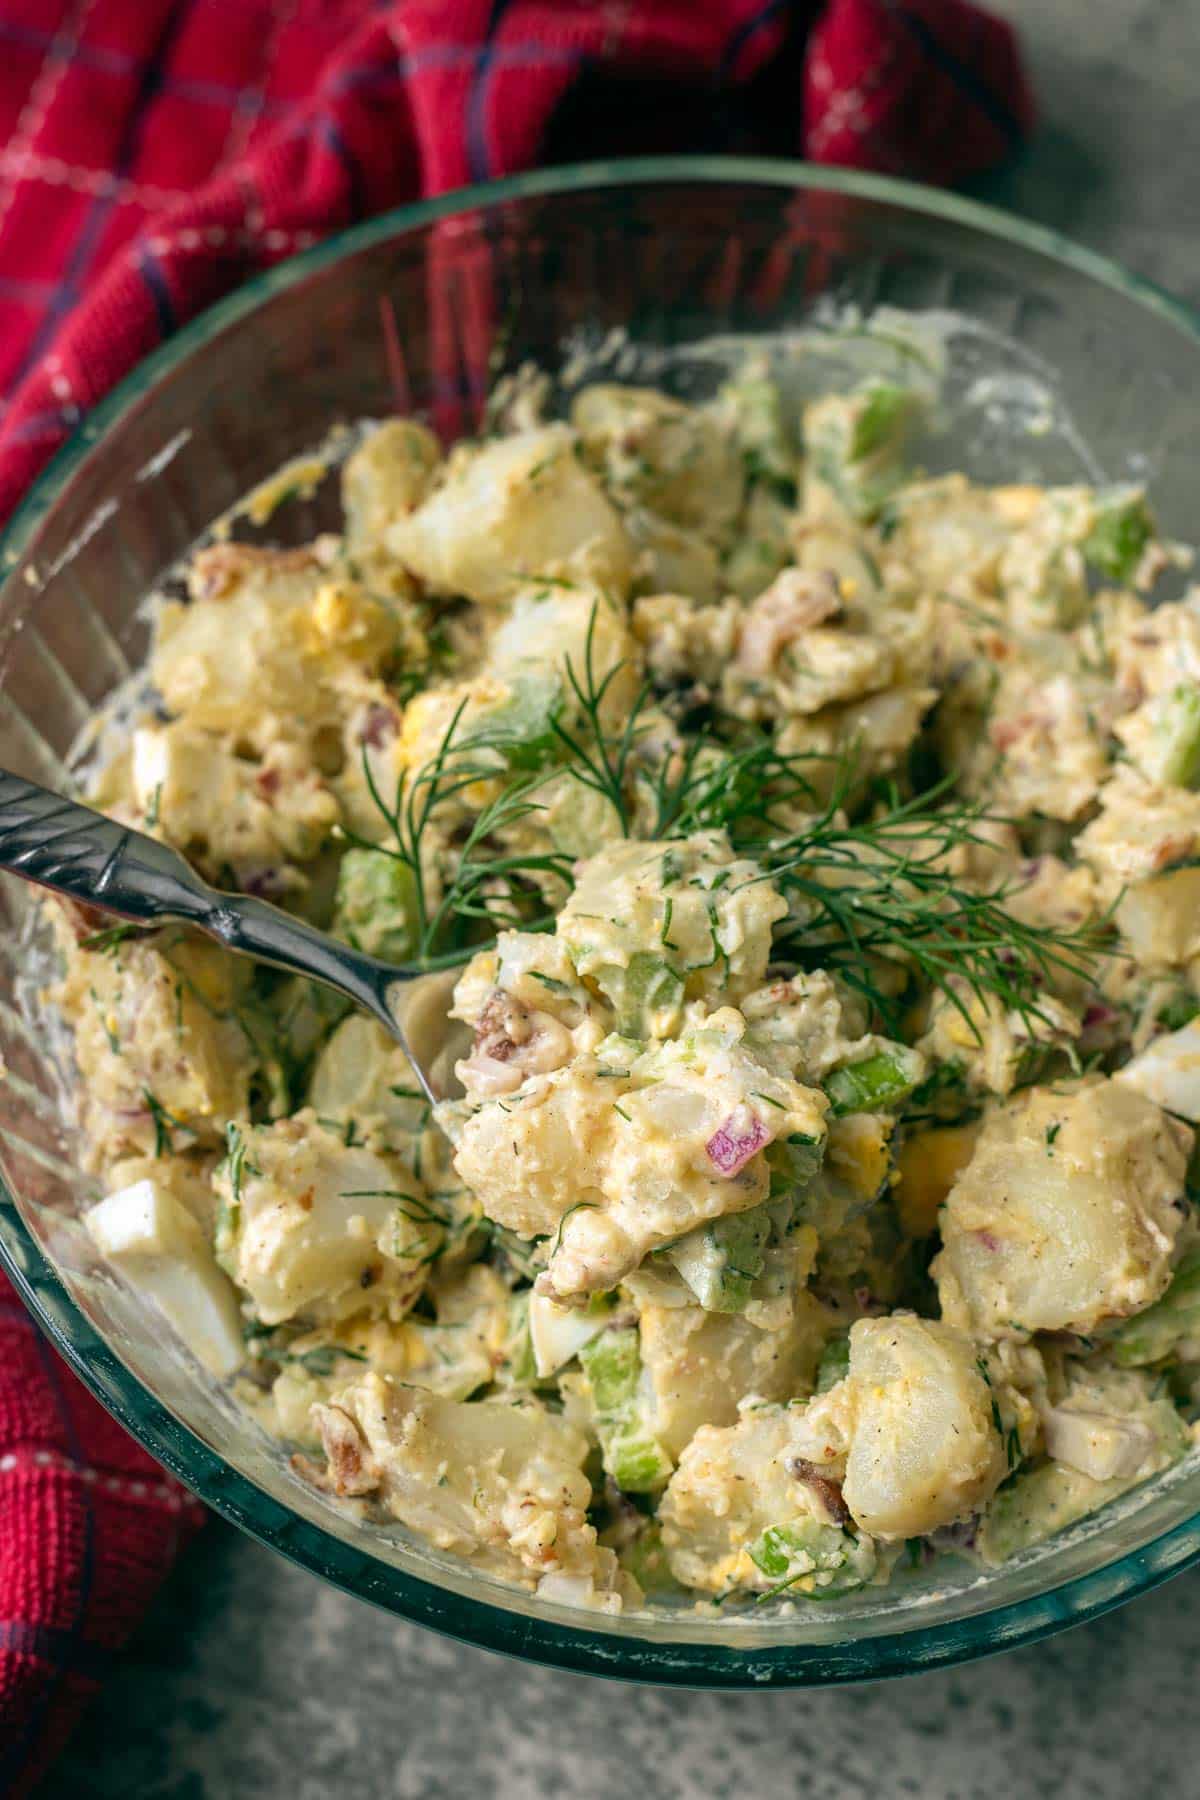 dill potato salad in a glass bowl with a red towel behind it